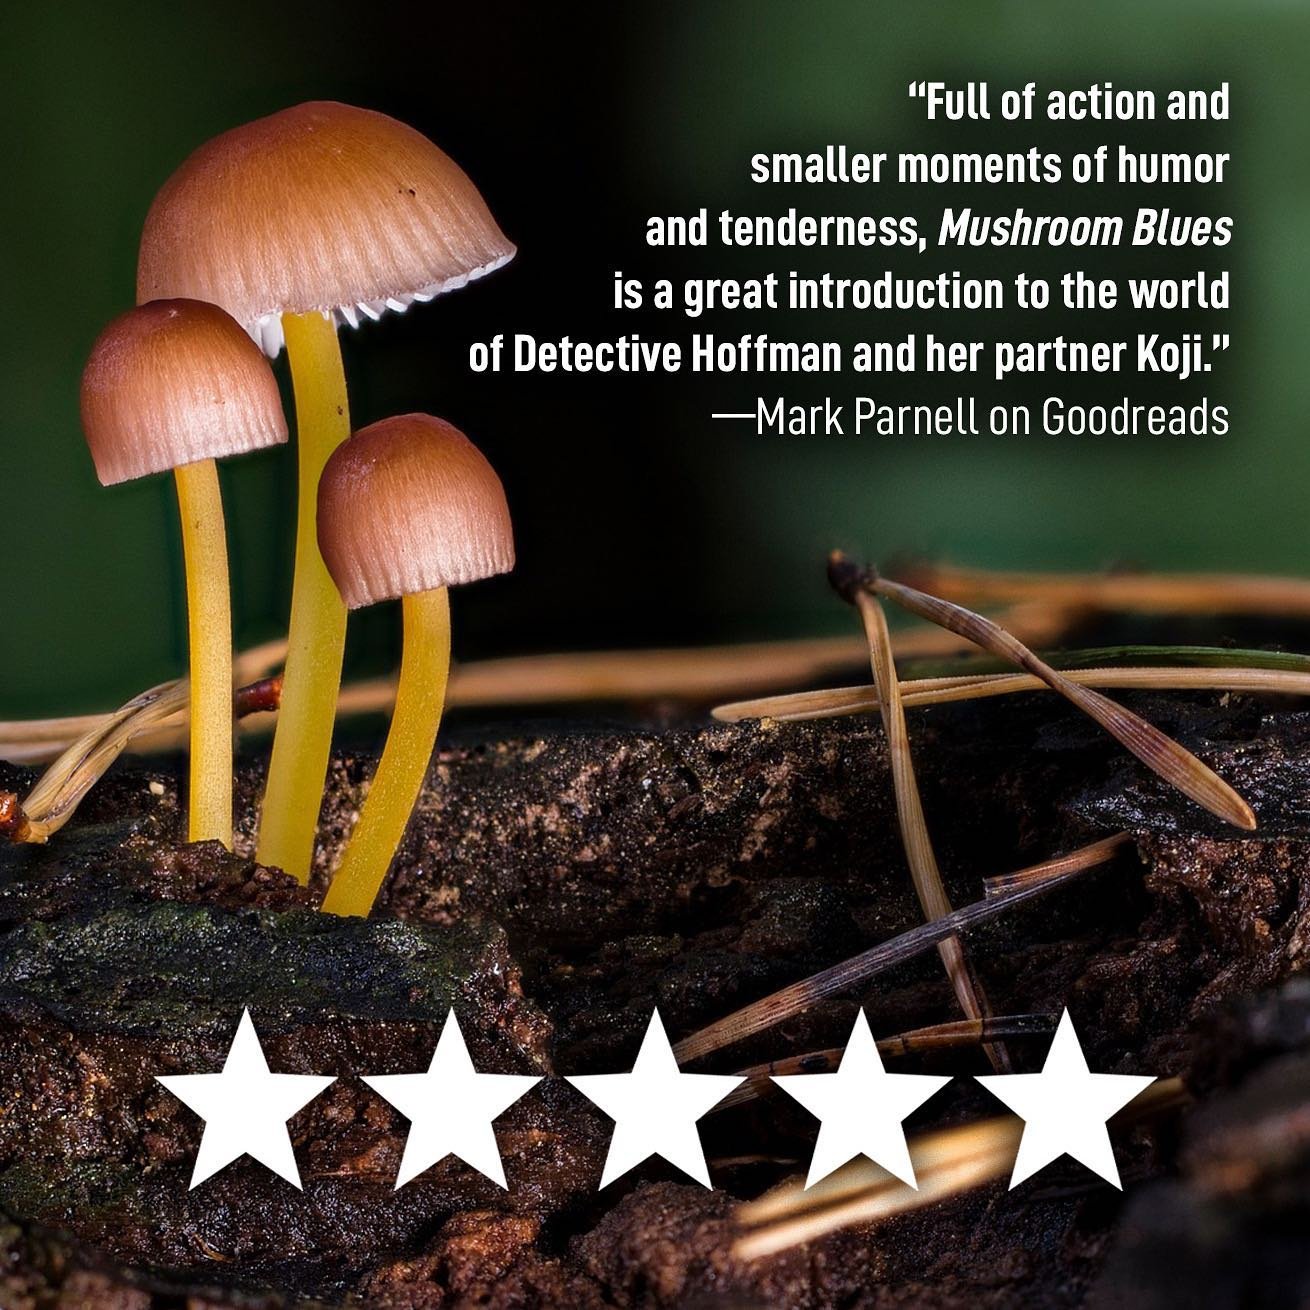 I love hearing what readers think of #MushroomBlues, and this 5⭐️ review from Mark Parnell was such a pleasure to read. Thank you for the positive review 🍄💙

BUY IT TODAY in paperback/hardcover/eBook on Amazon or read it FREE on Kindle Unlimited.
&